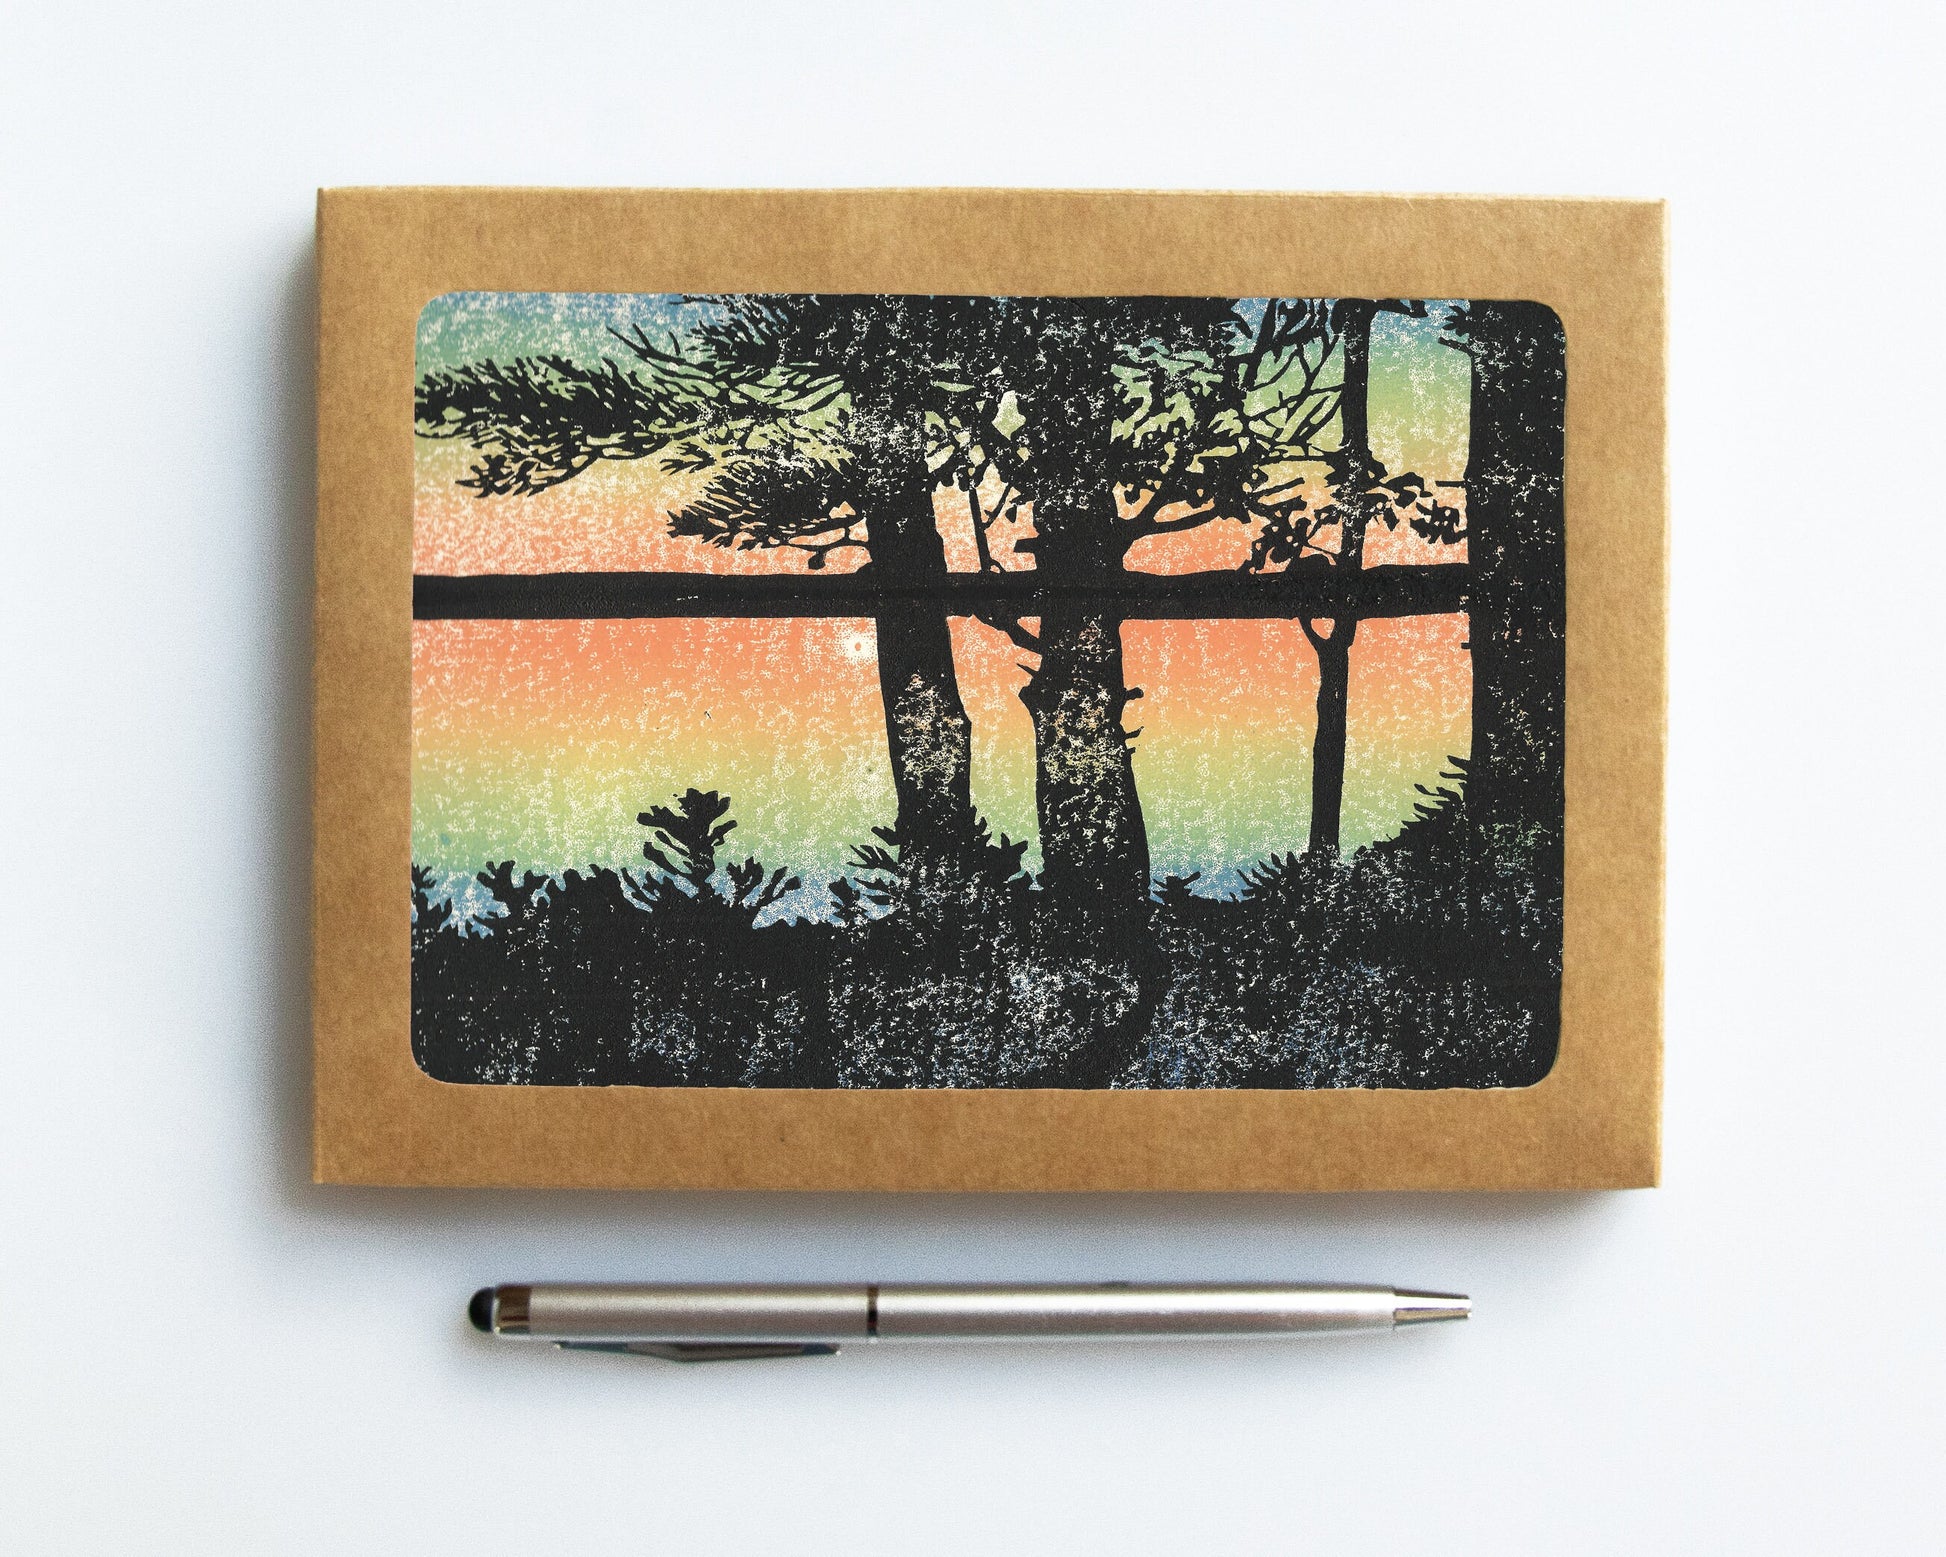 A casually elegant card set featuring Michigan landscapes art by Natalia Wohletz of Peninsula Prints titled Sunset.